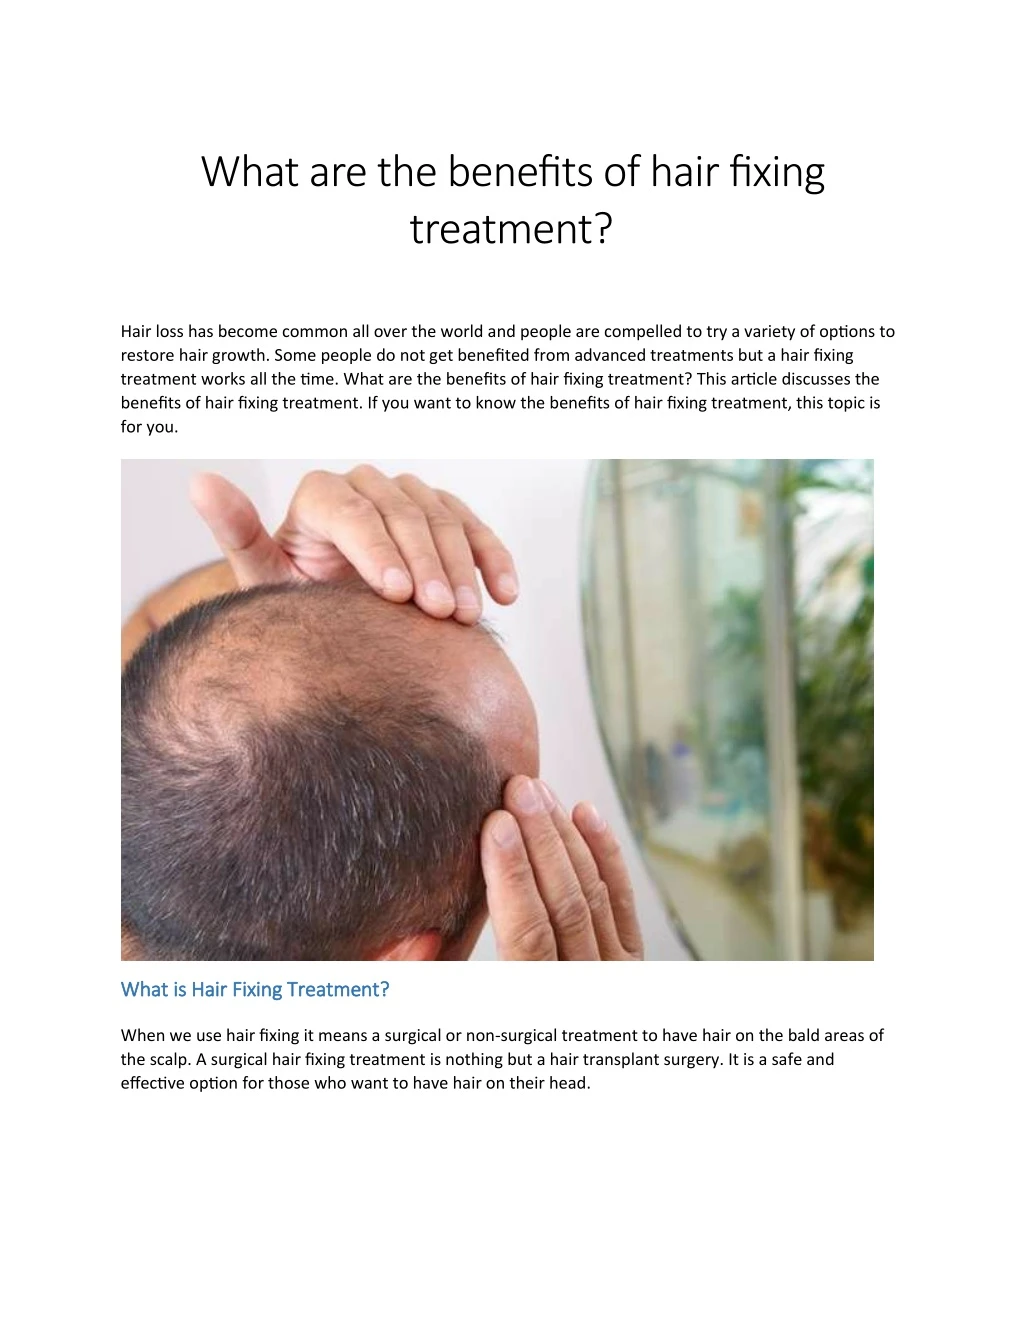 what are the benefits of hair fixing treatment